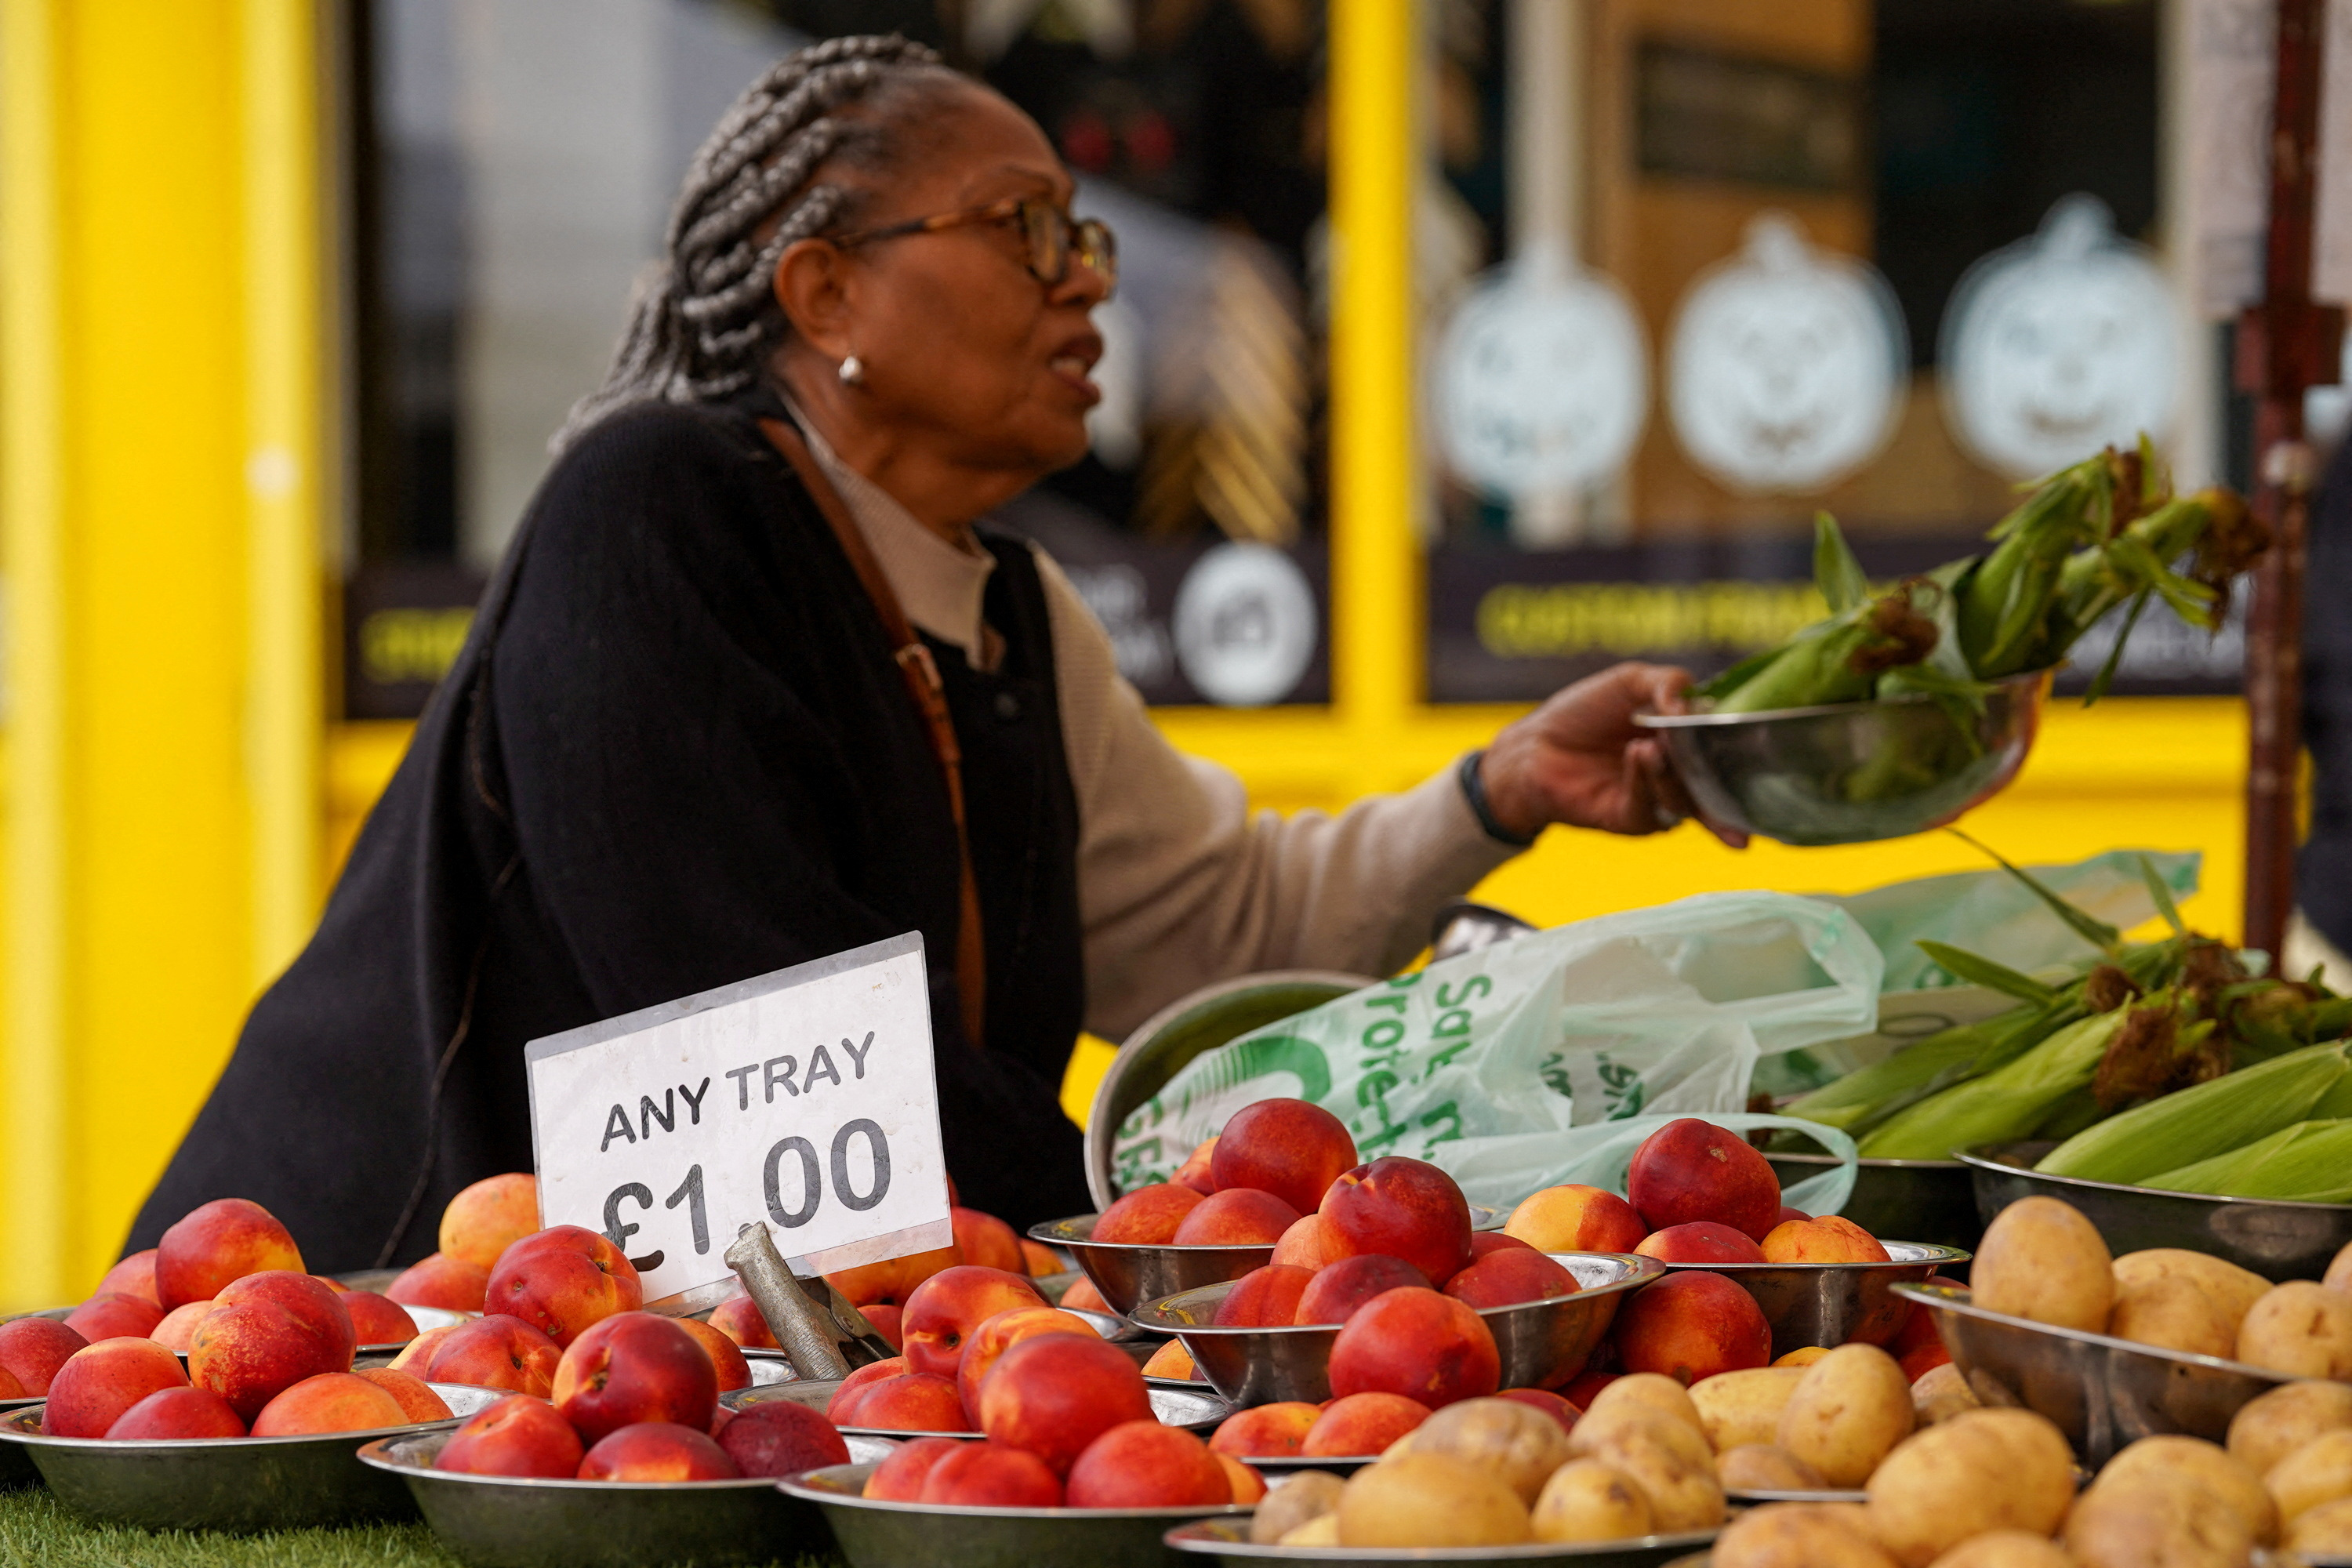 A woman shops for food items at a market stall in London